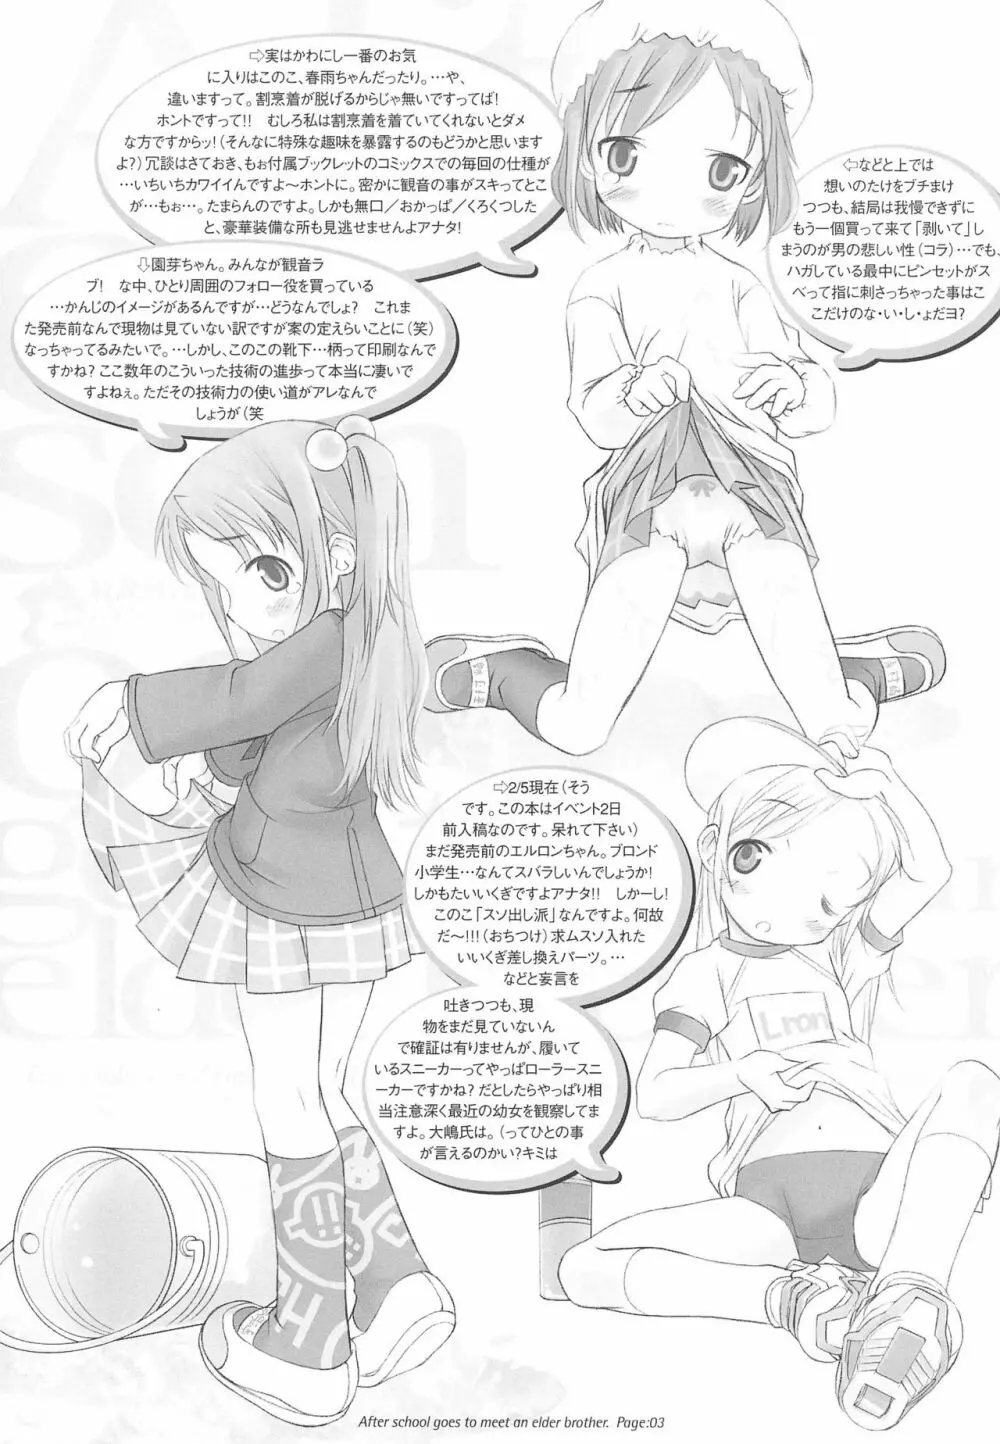 After School Goes To Meet An Elder Brother 放課後はお兄ちゃんに逢いに行きます。 3ページ